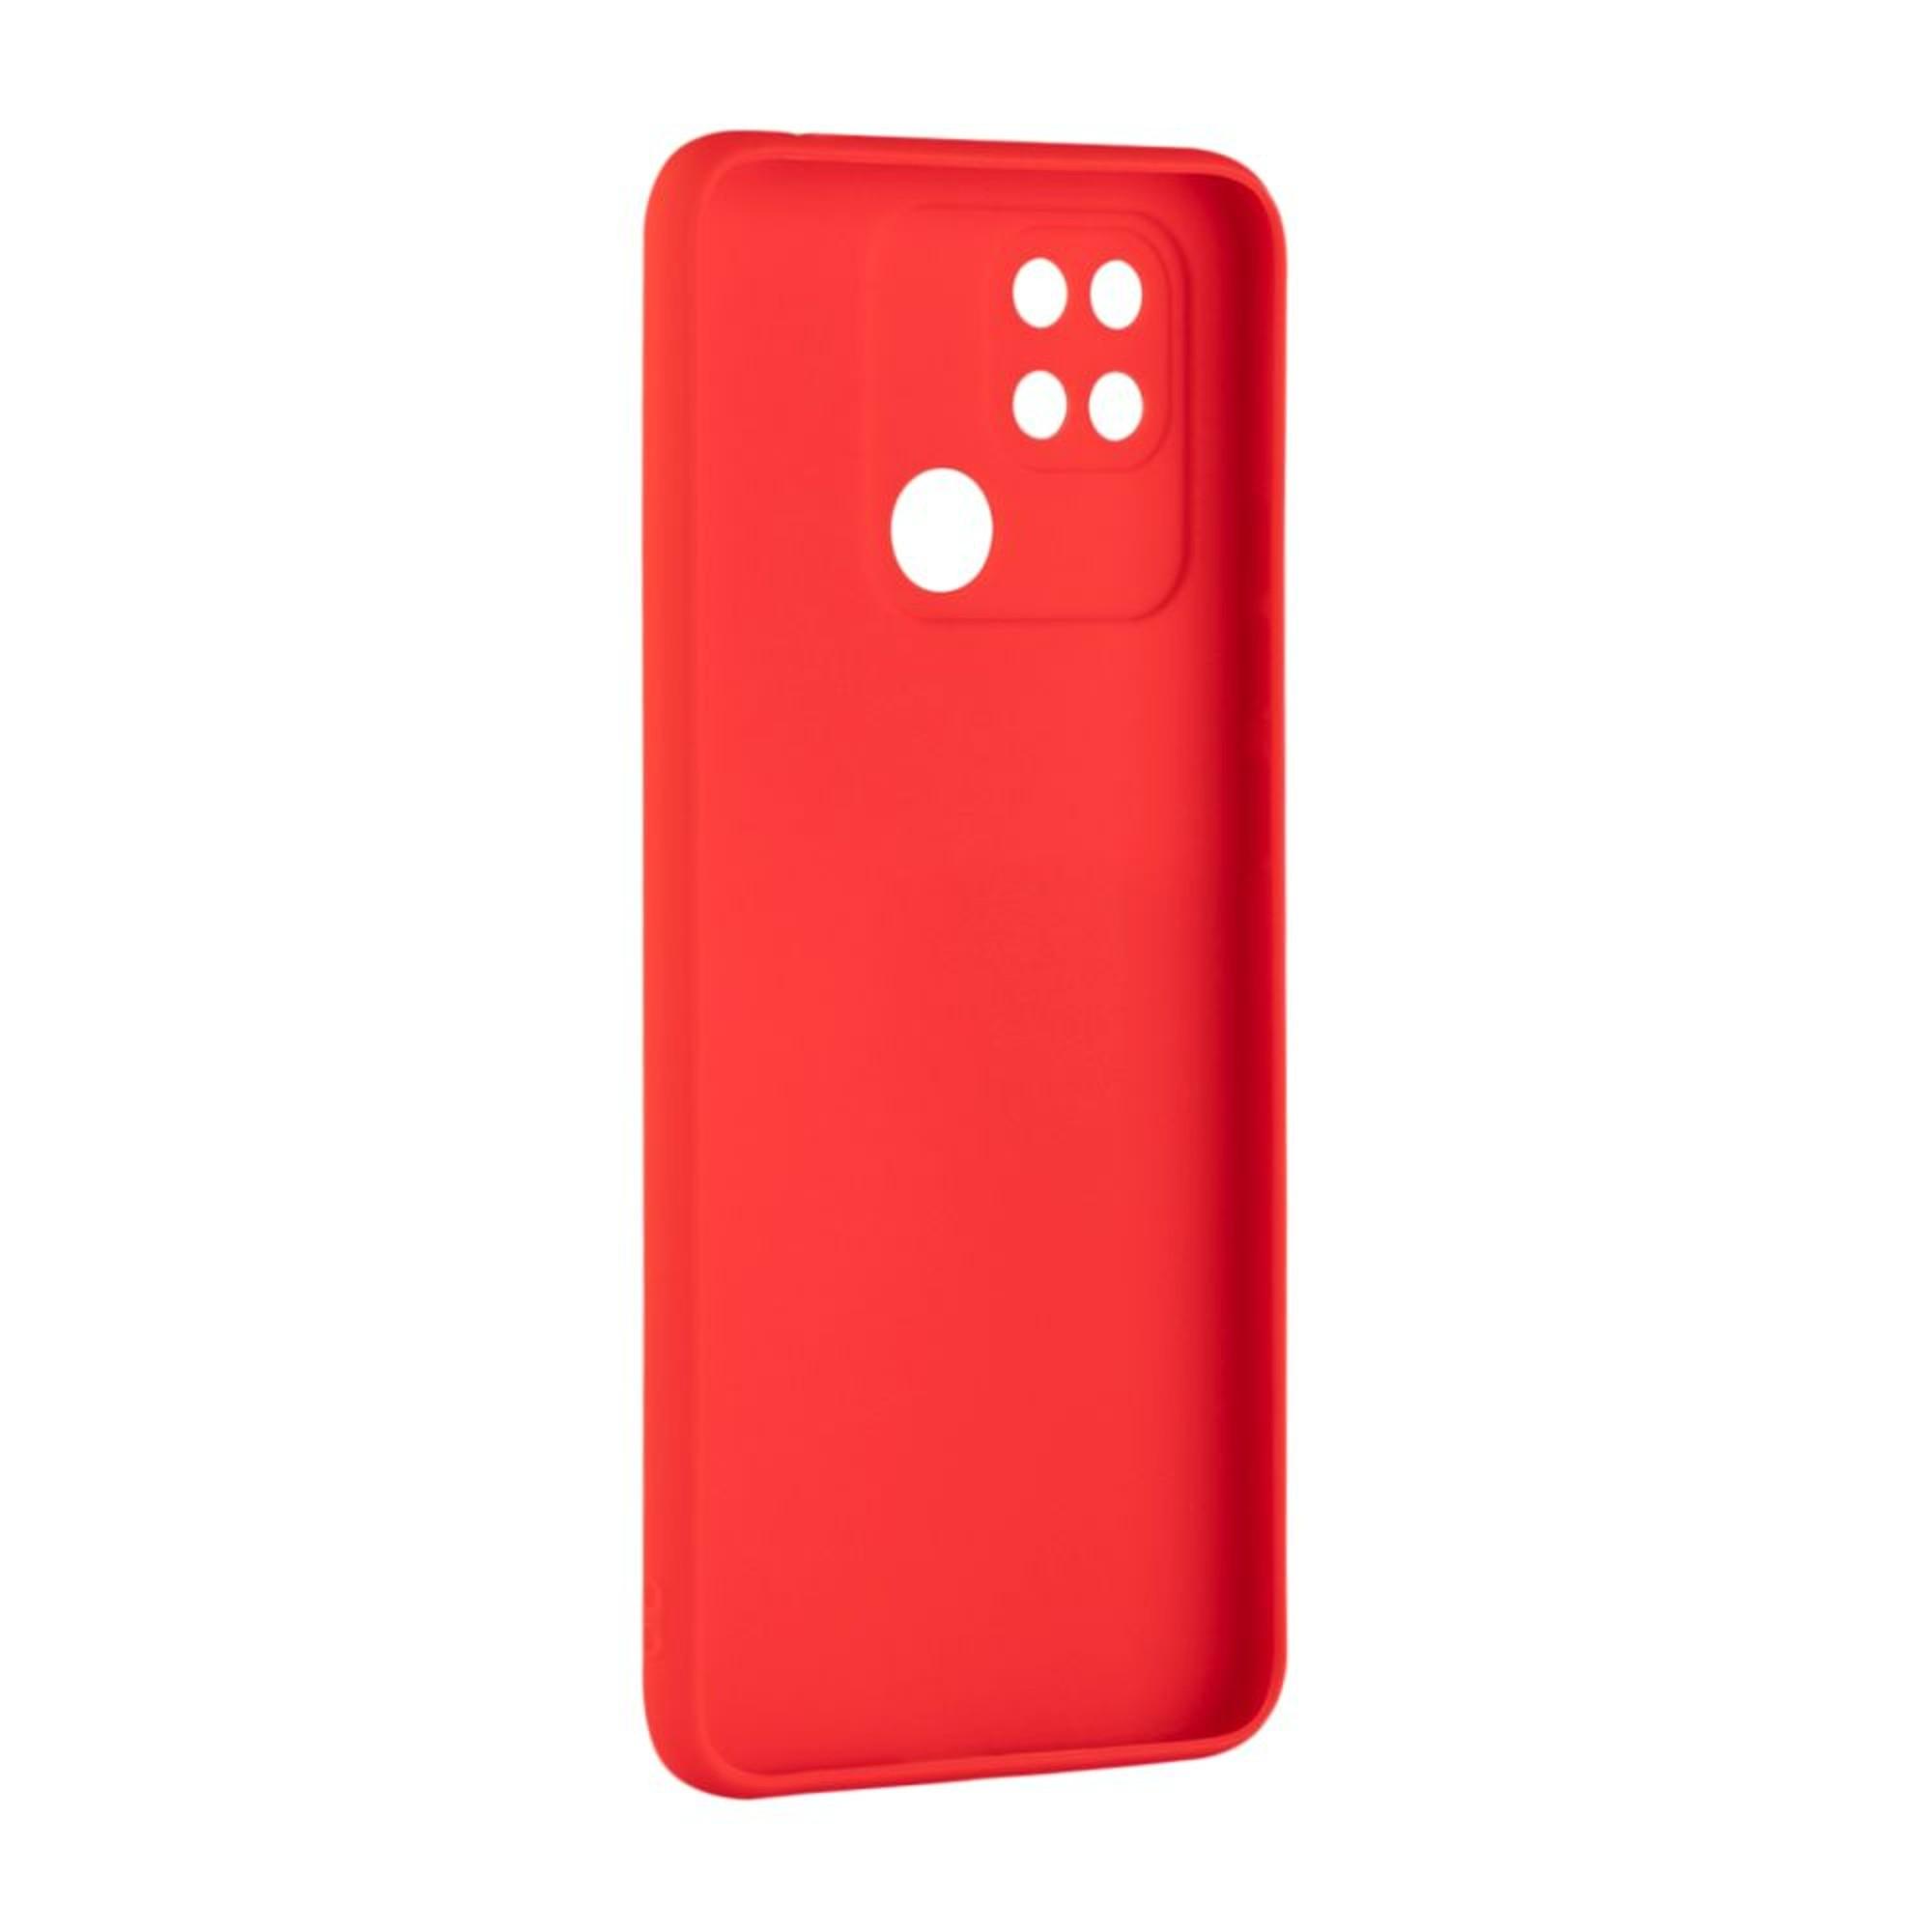 FIXED FIXST-907-RD, Backcover, 10C, Rot Xiaomi, Redmi